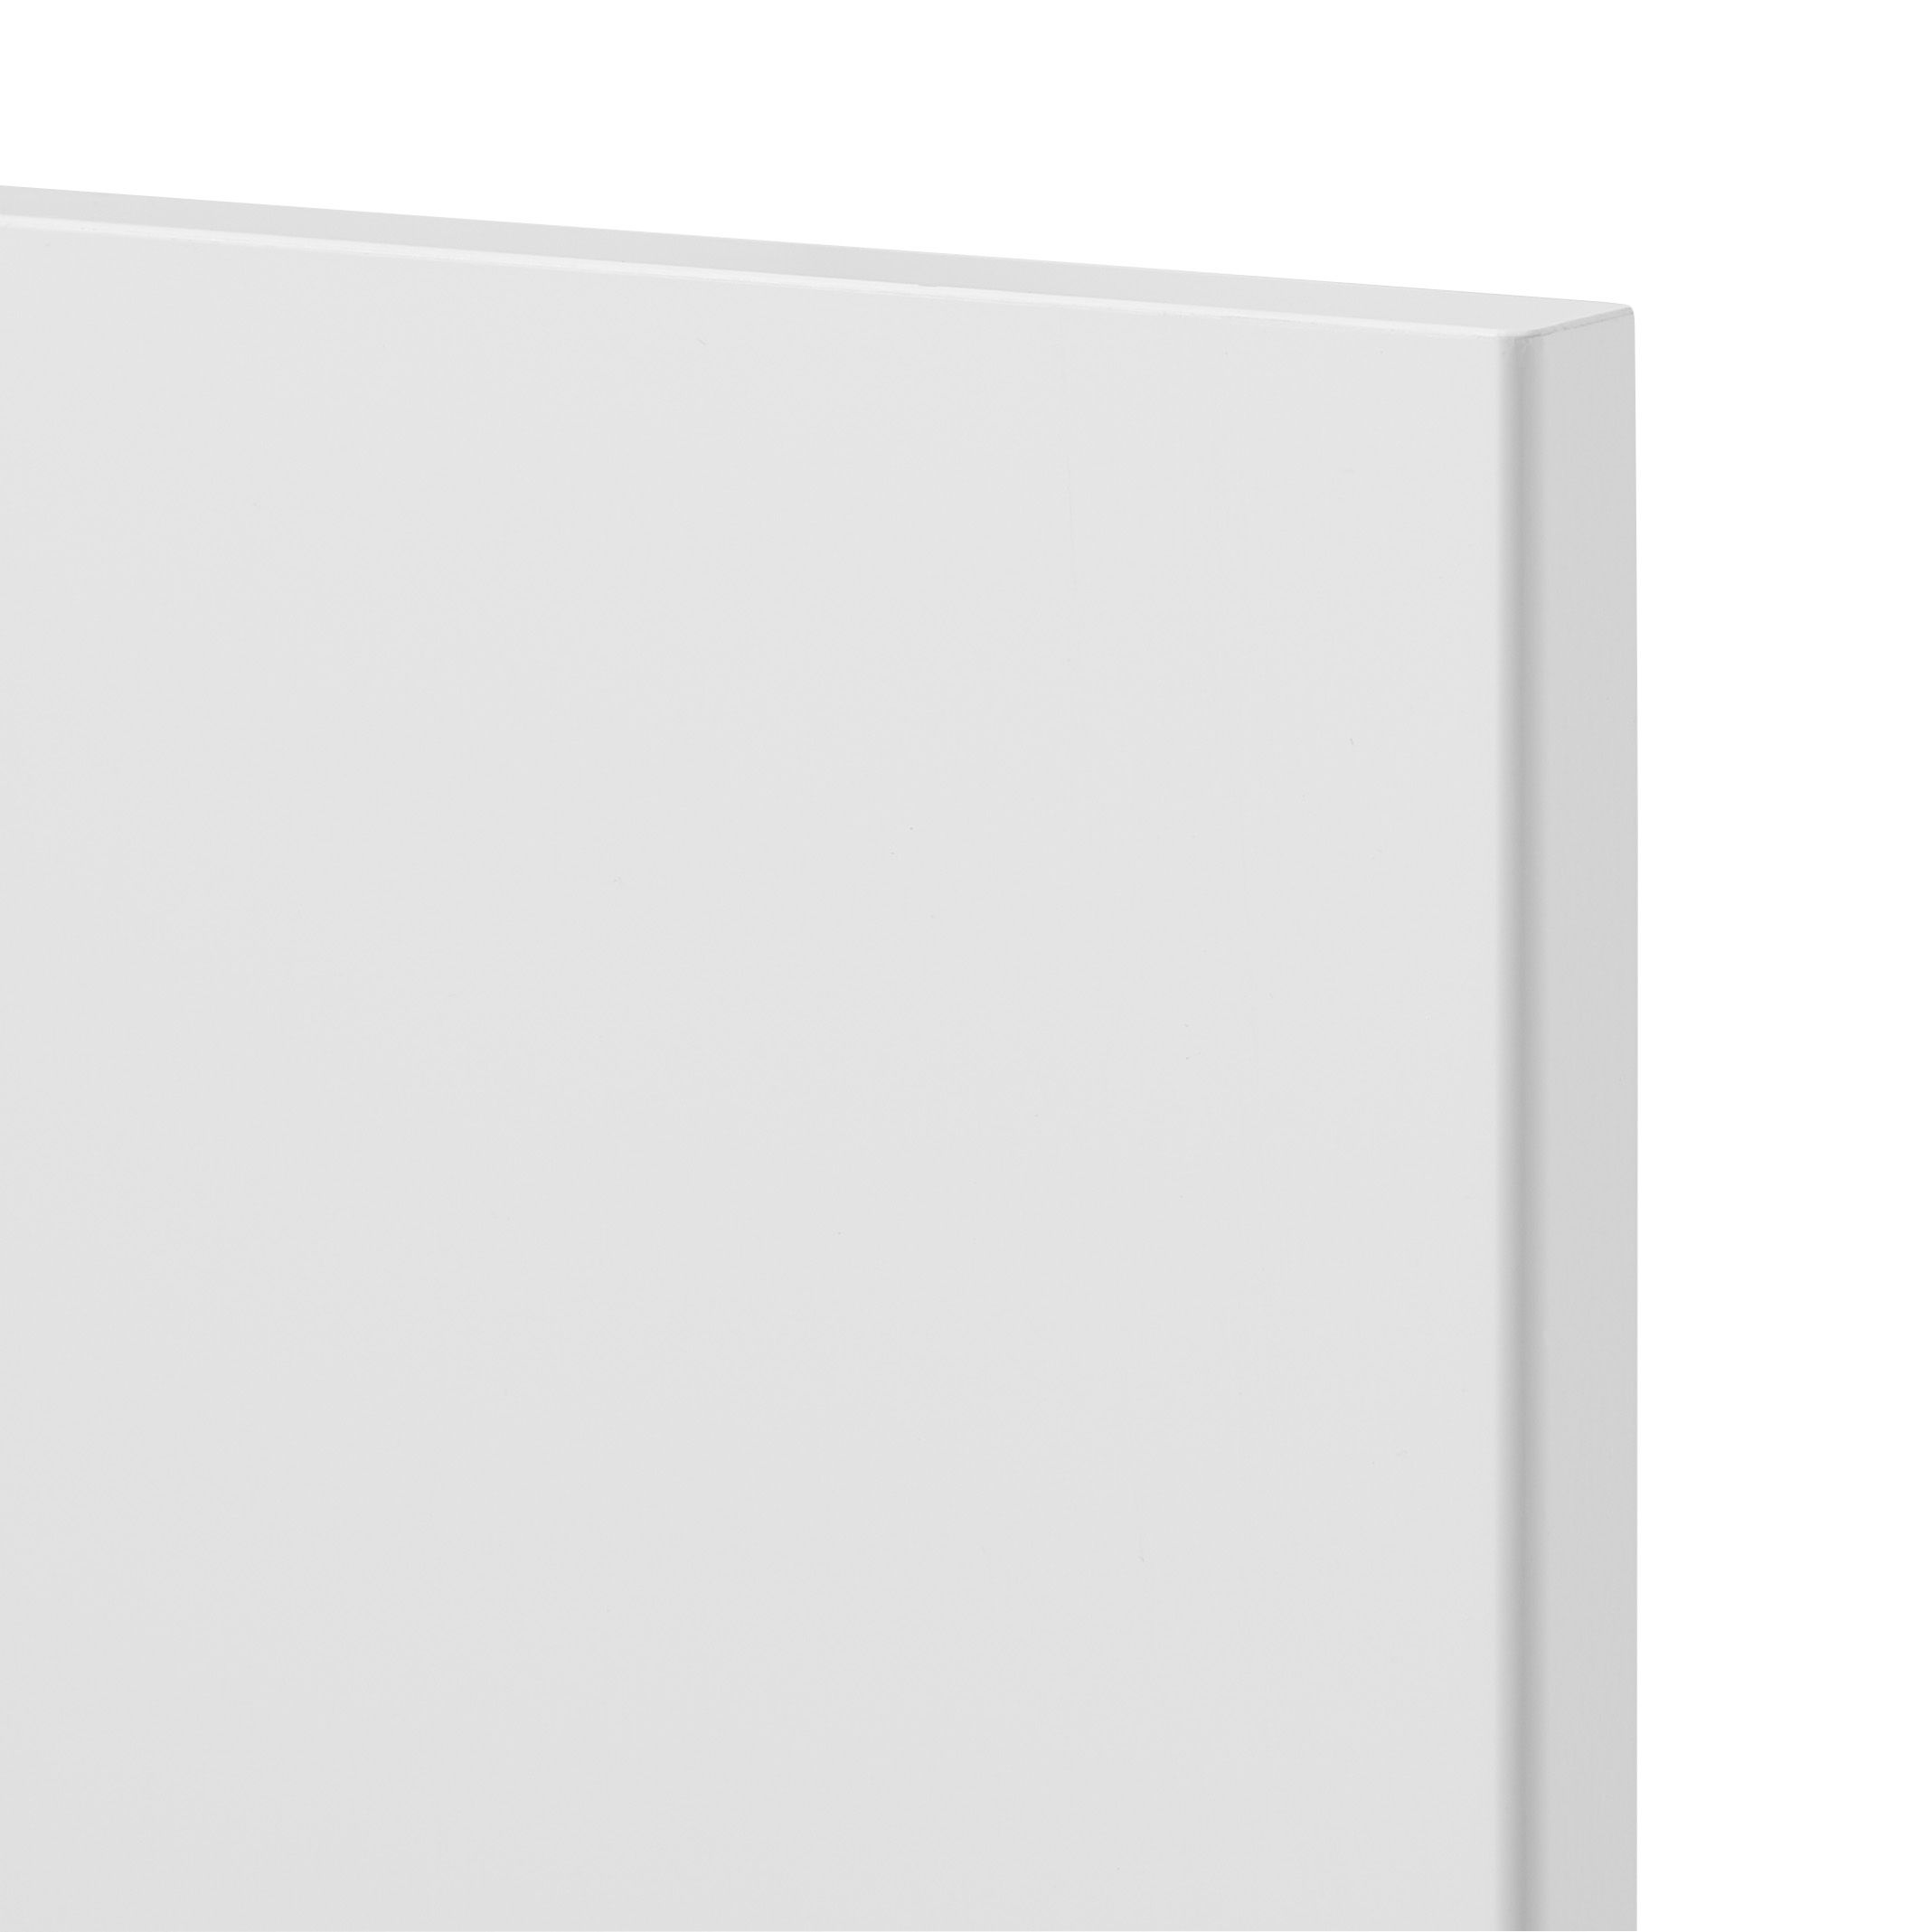 GoodHome Stevia Gloss white slab Drawer front (W)800mm, Pack of 3